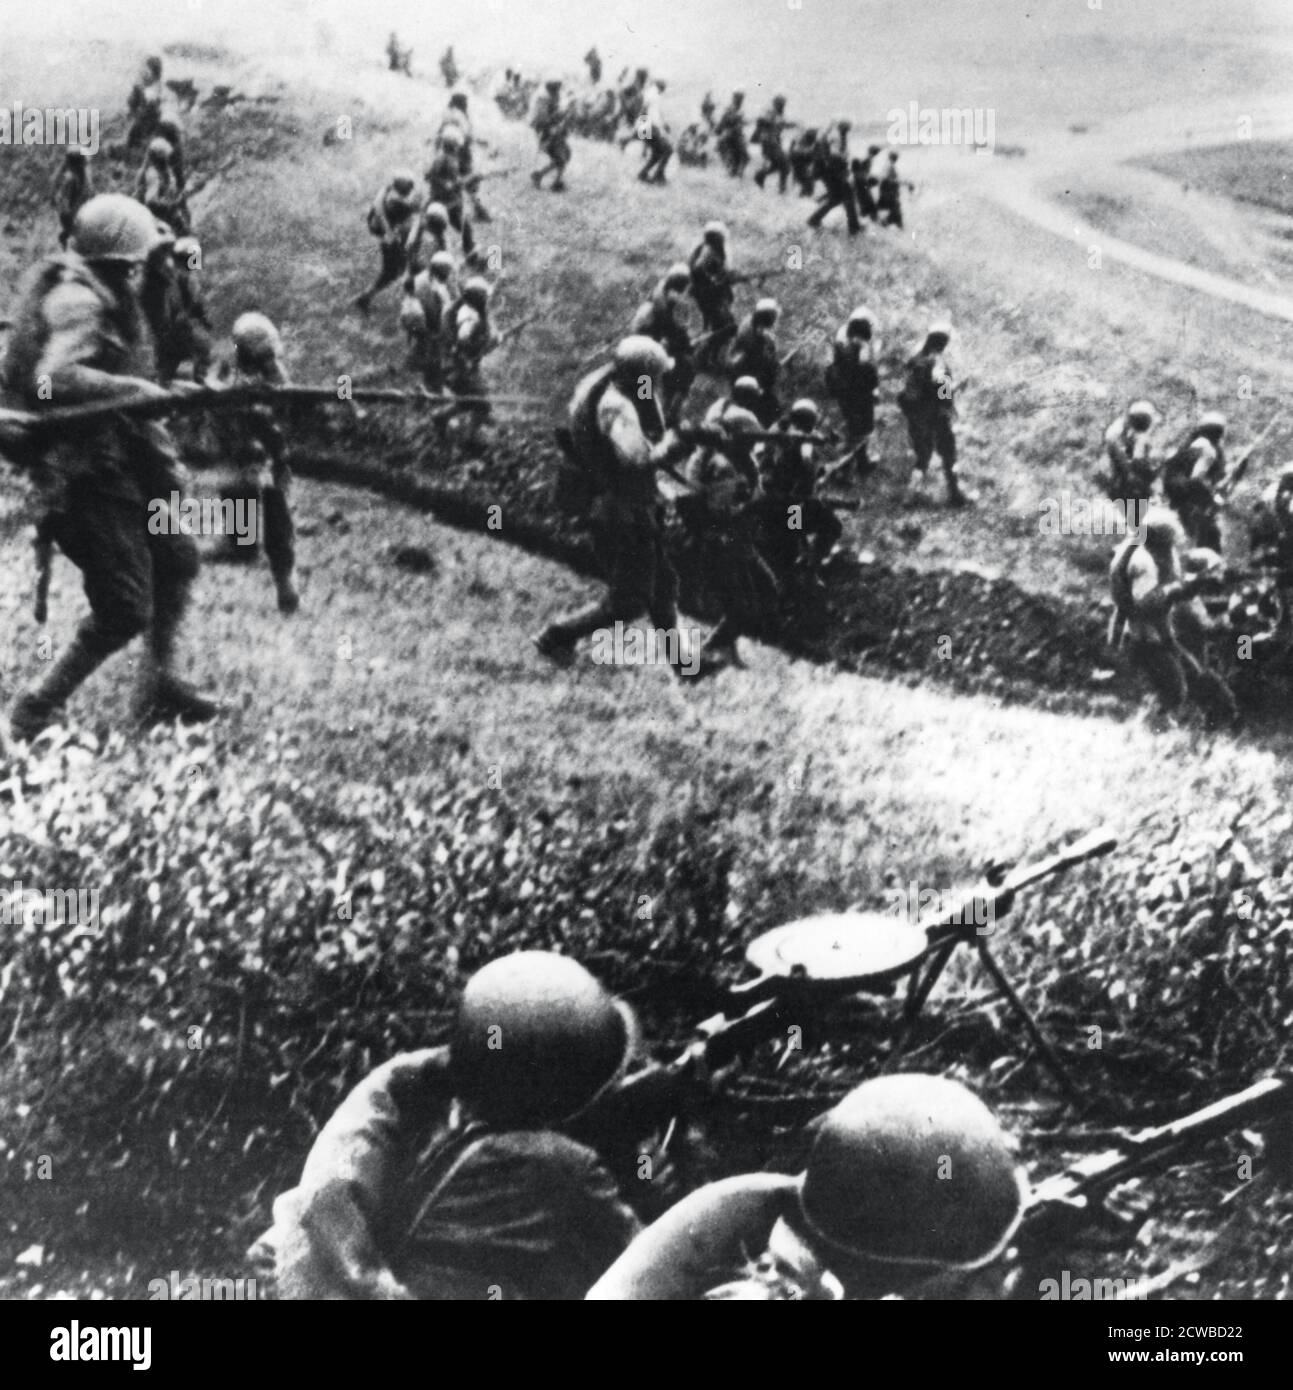 Russian troops on the counter-attack, Mozdok region, northern Caucasus, September 1942. The German campaign to capture of the Azerbaijani oilfields was halted by the Red Army in the Caucasus in September 1942. From January 1943, several Soviet offensives pushed the Germans back. The photographer is unknown. Stock Photo